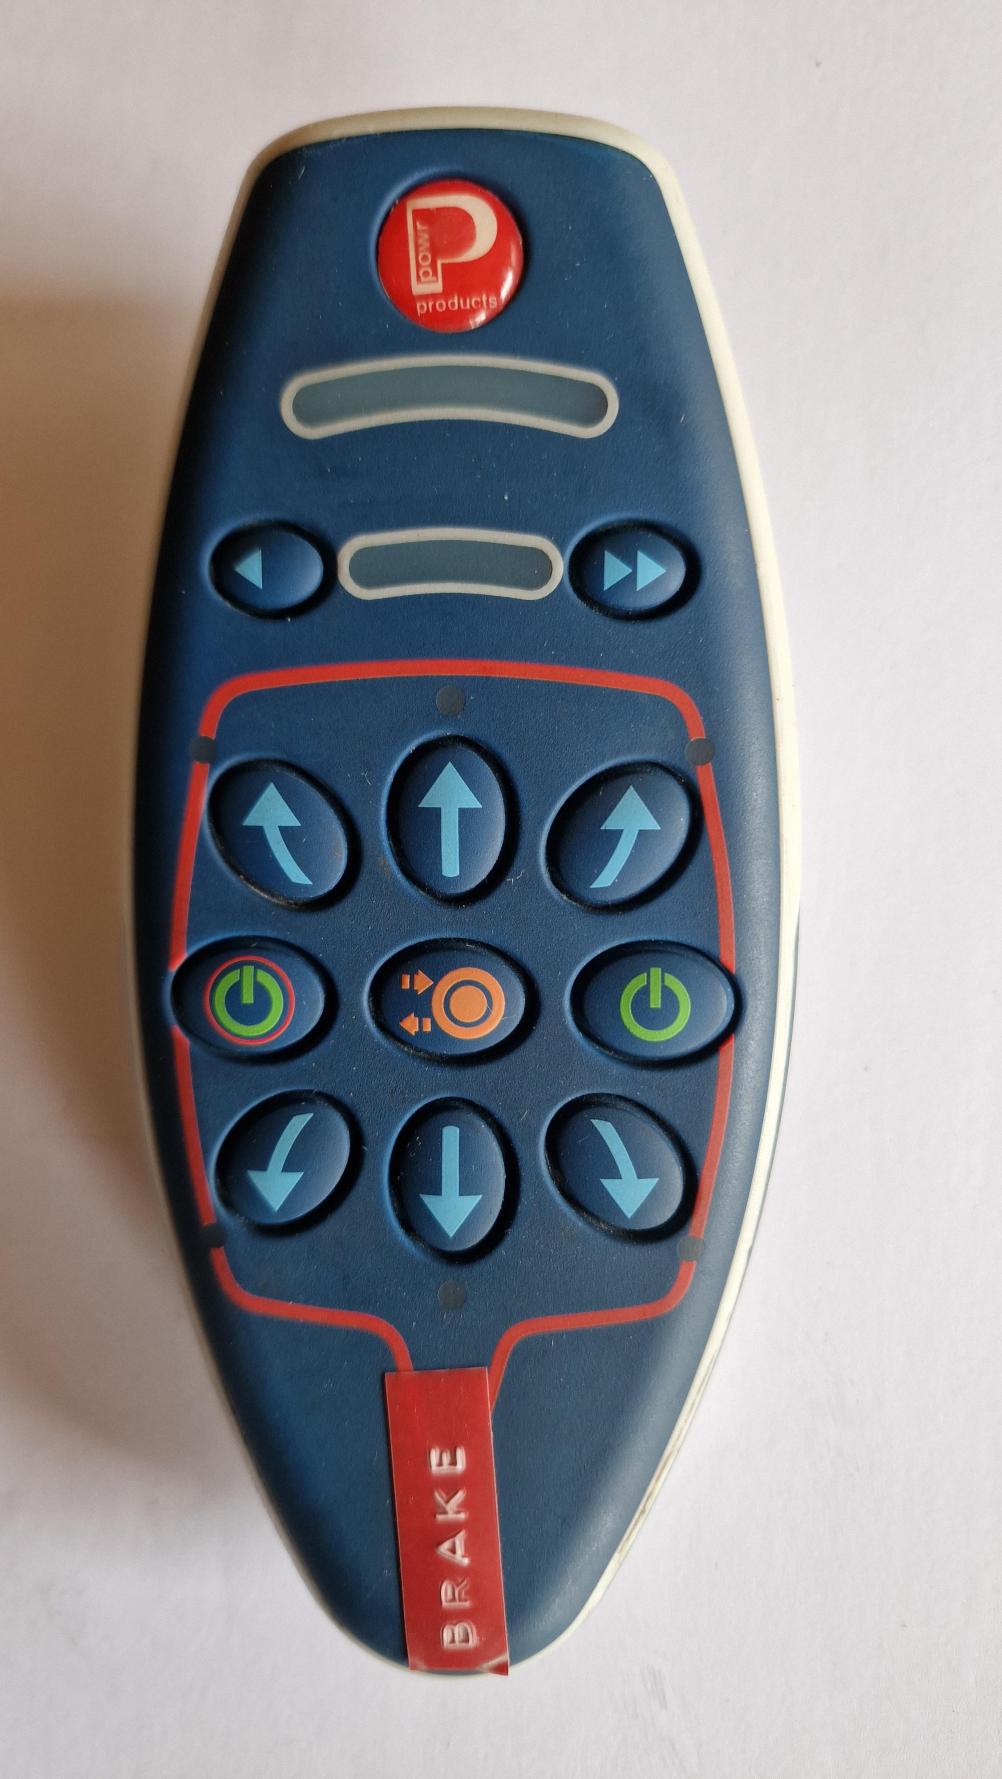 Powrtouch  Remote Control - Front Image